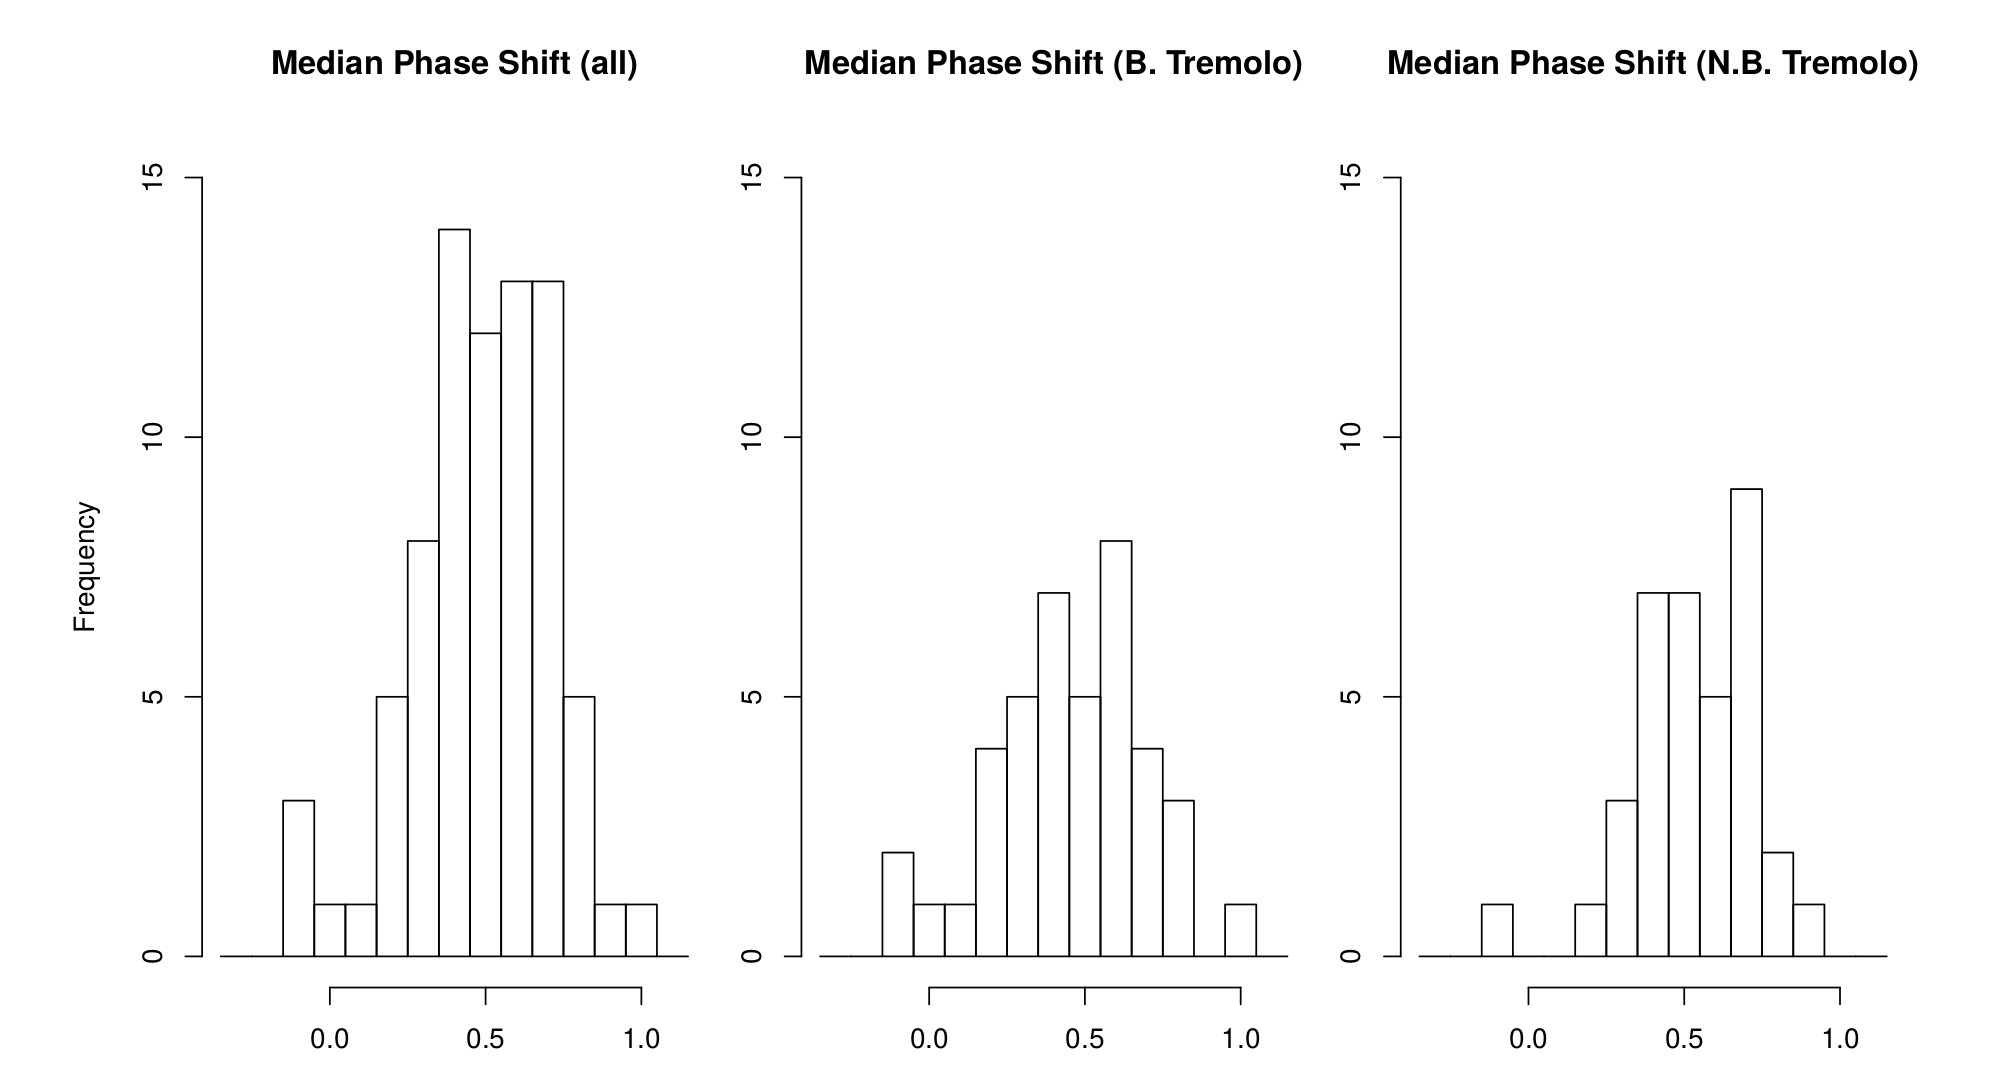 Median phase shifts among all, bad tremolo, and non-bad tremolo recordings. More description above and below.